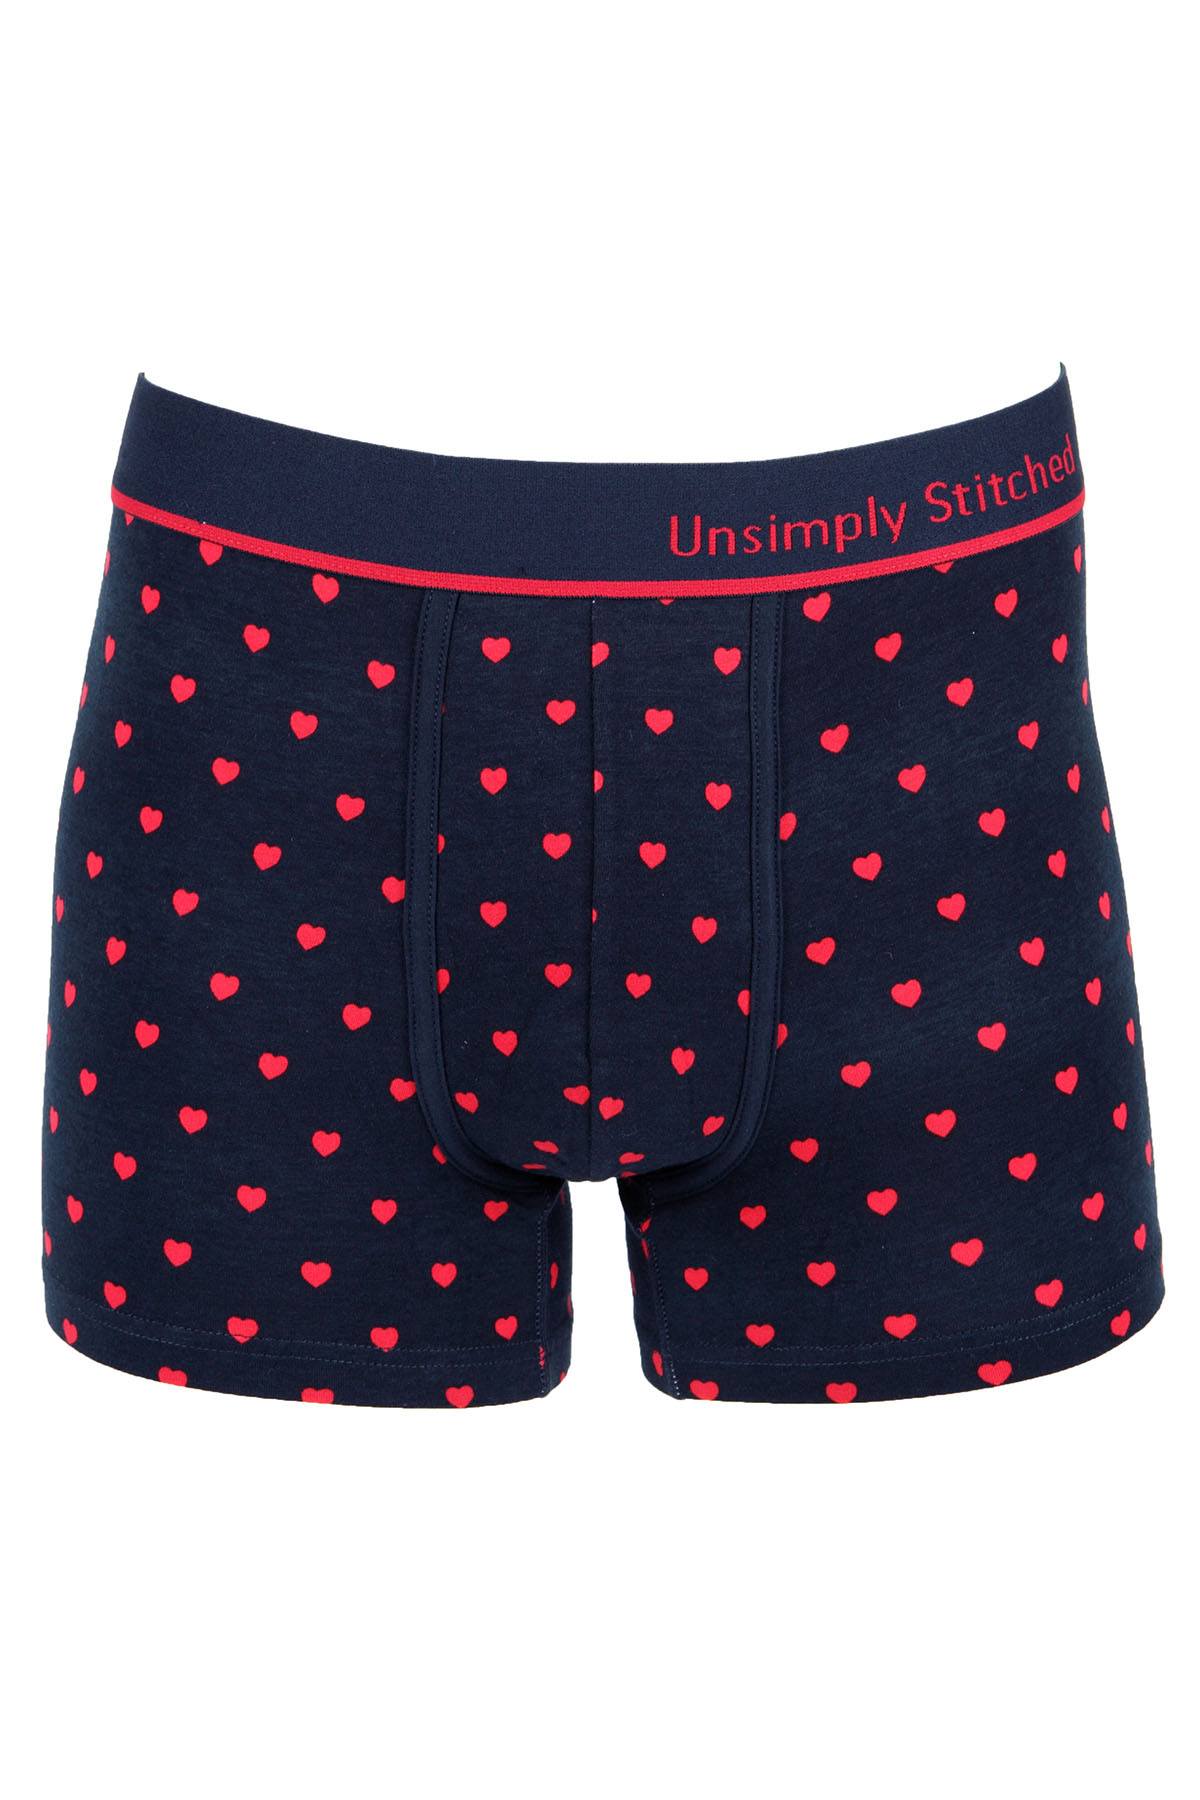 Unsimply Stitched Navy Hearts Trunk